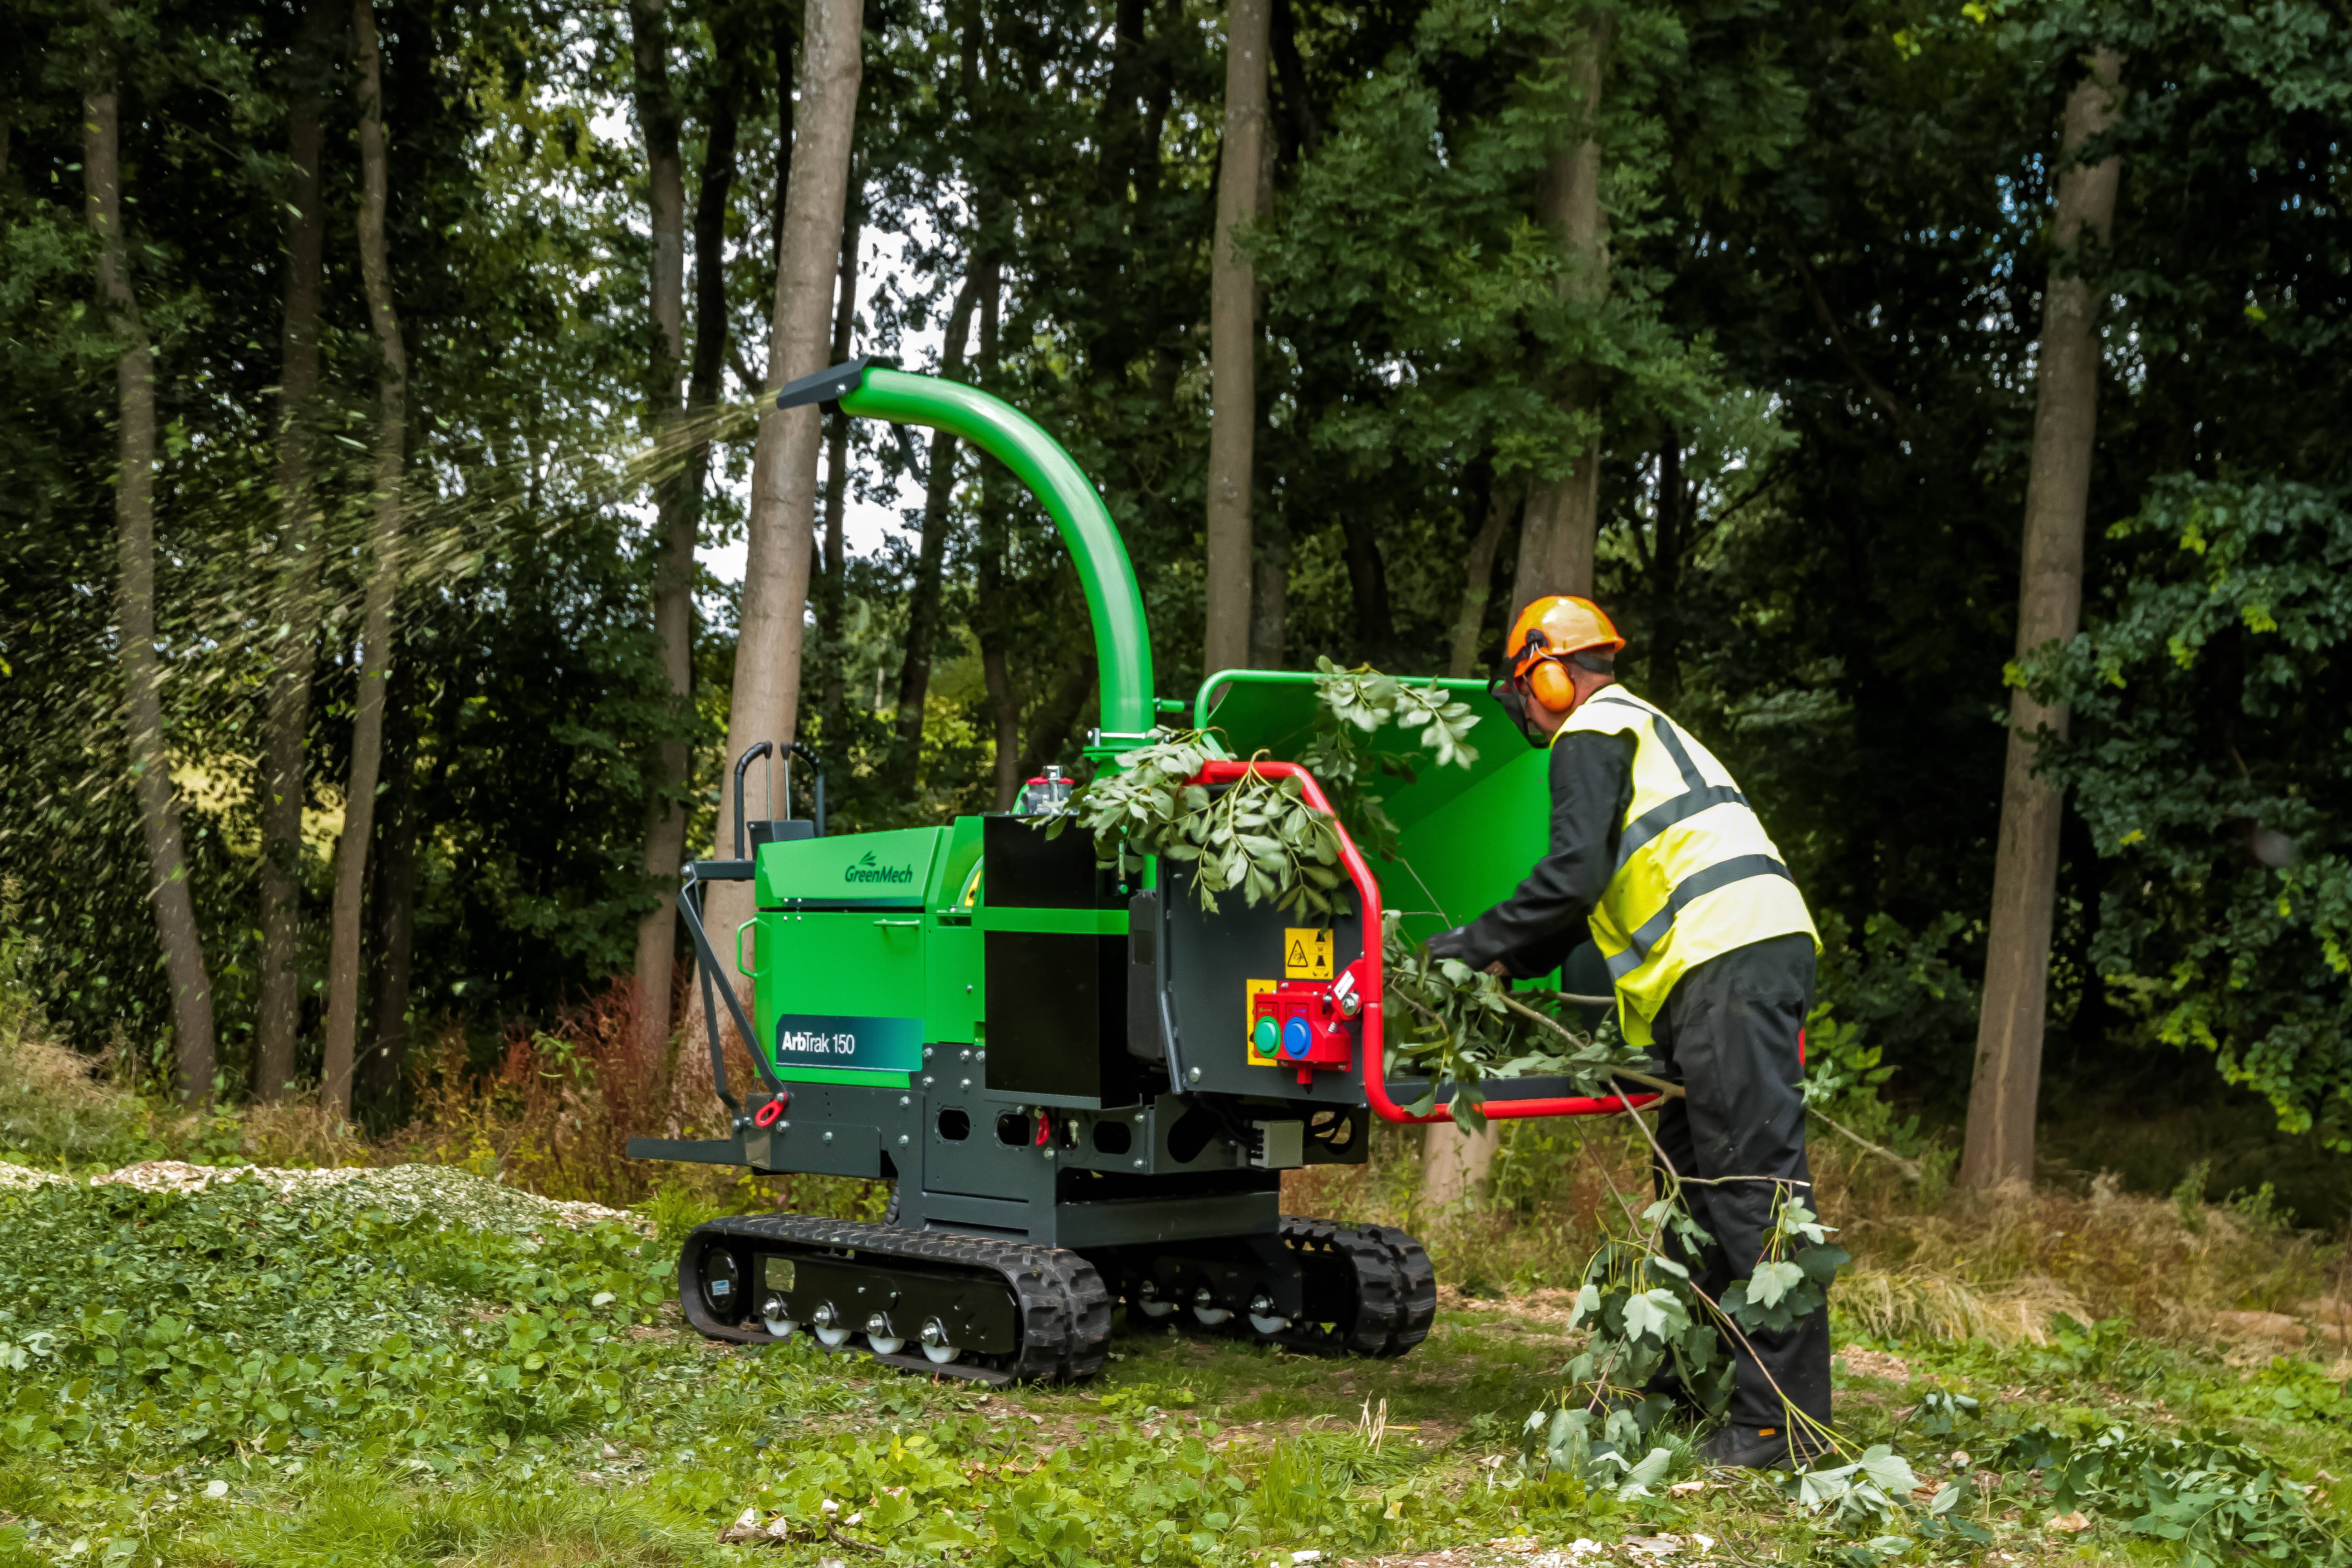 Wood Chipper Rental Guide Costs Considerations Wood Chipper Chipper Wood